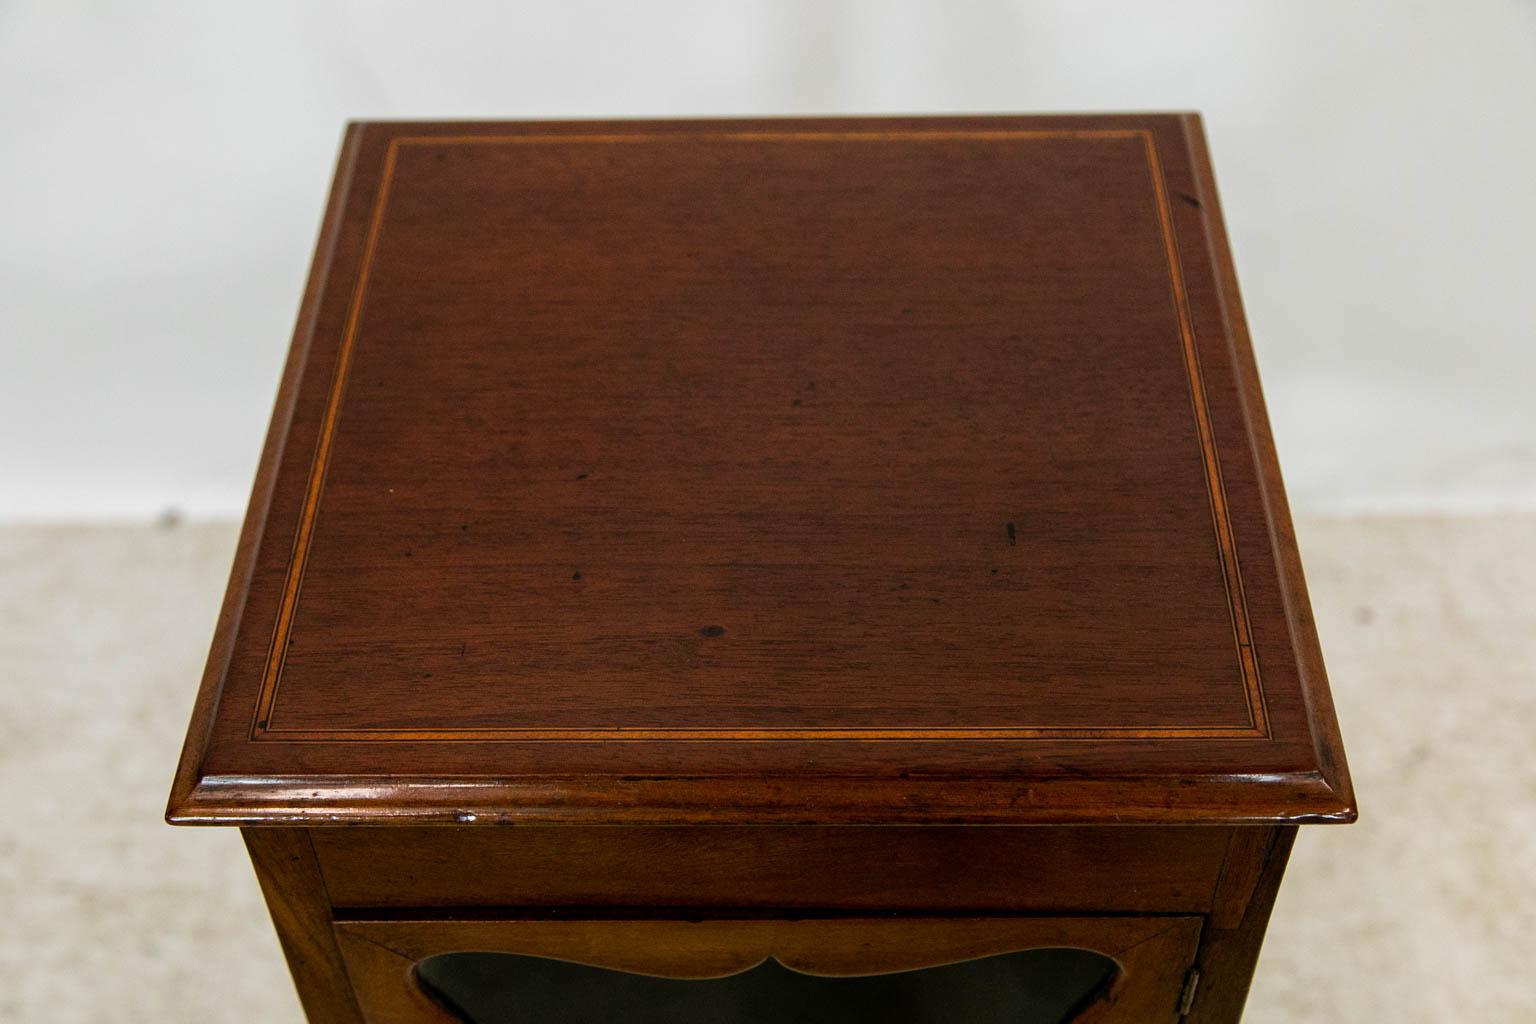 The top of this cabinet is inlaid with ebony and boxwood banding. The cabinet section has glass windows on all four sides that have shaped framing. The single drawer below the cabinet is inlaid with boxwood stringing. The four legs are connected